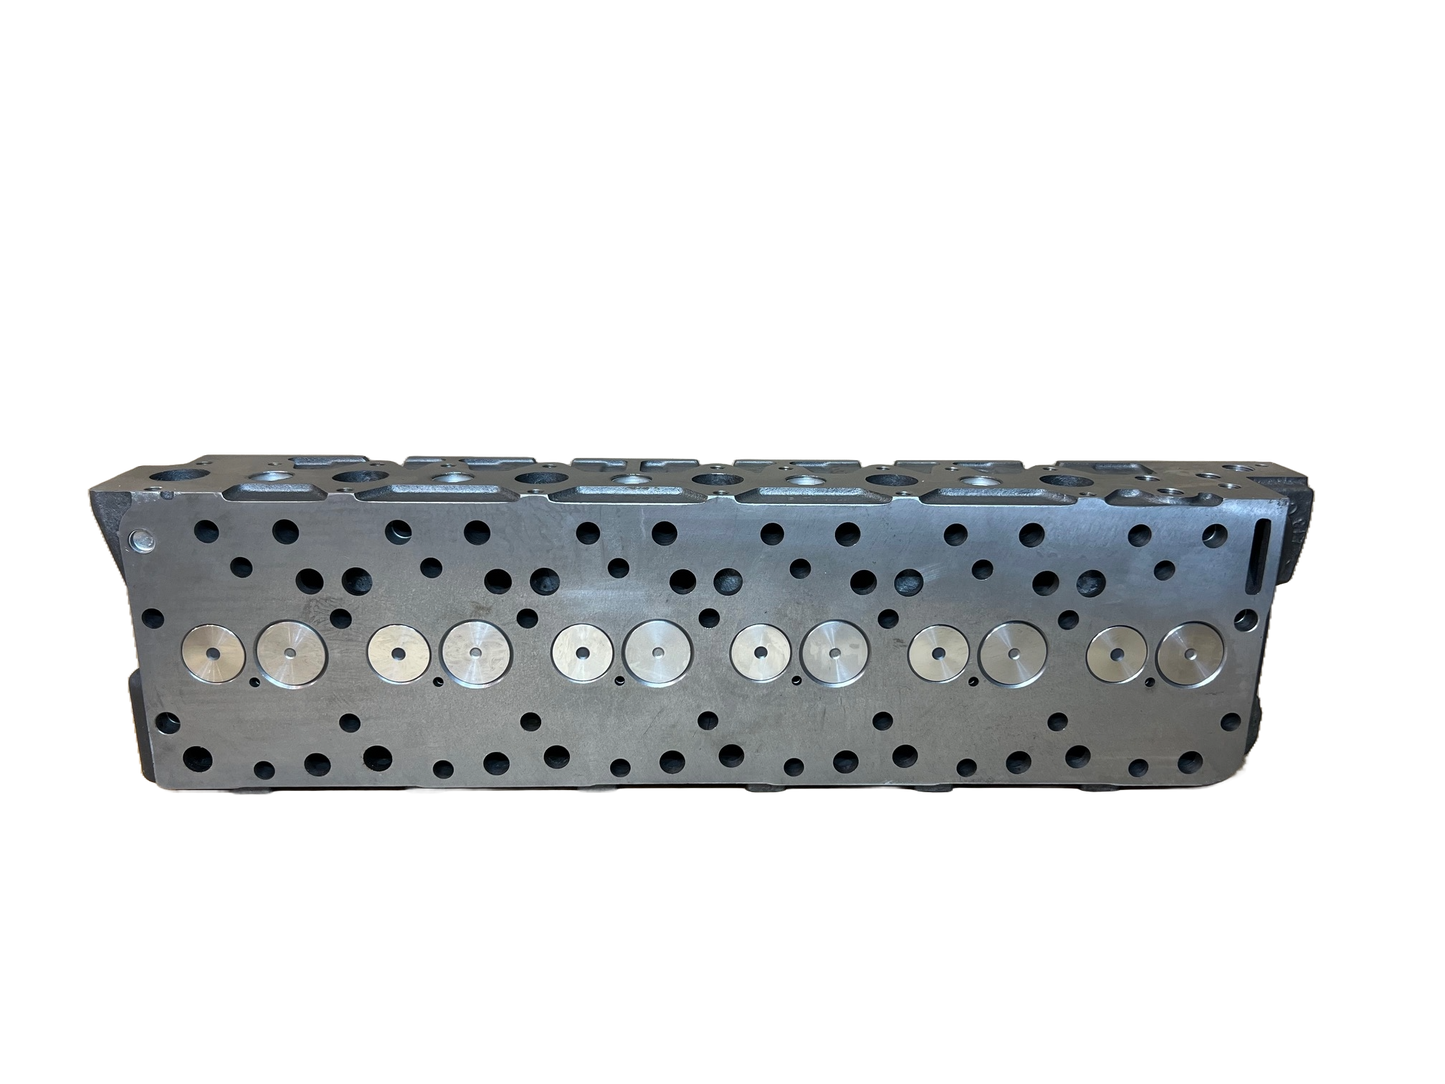 New Cylinder Head for International DT466E / DT530 (late style)